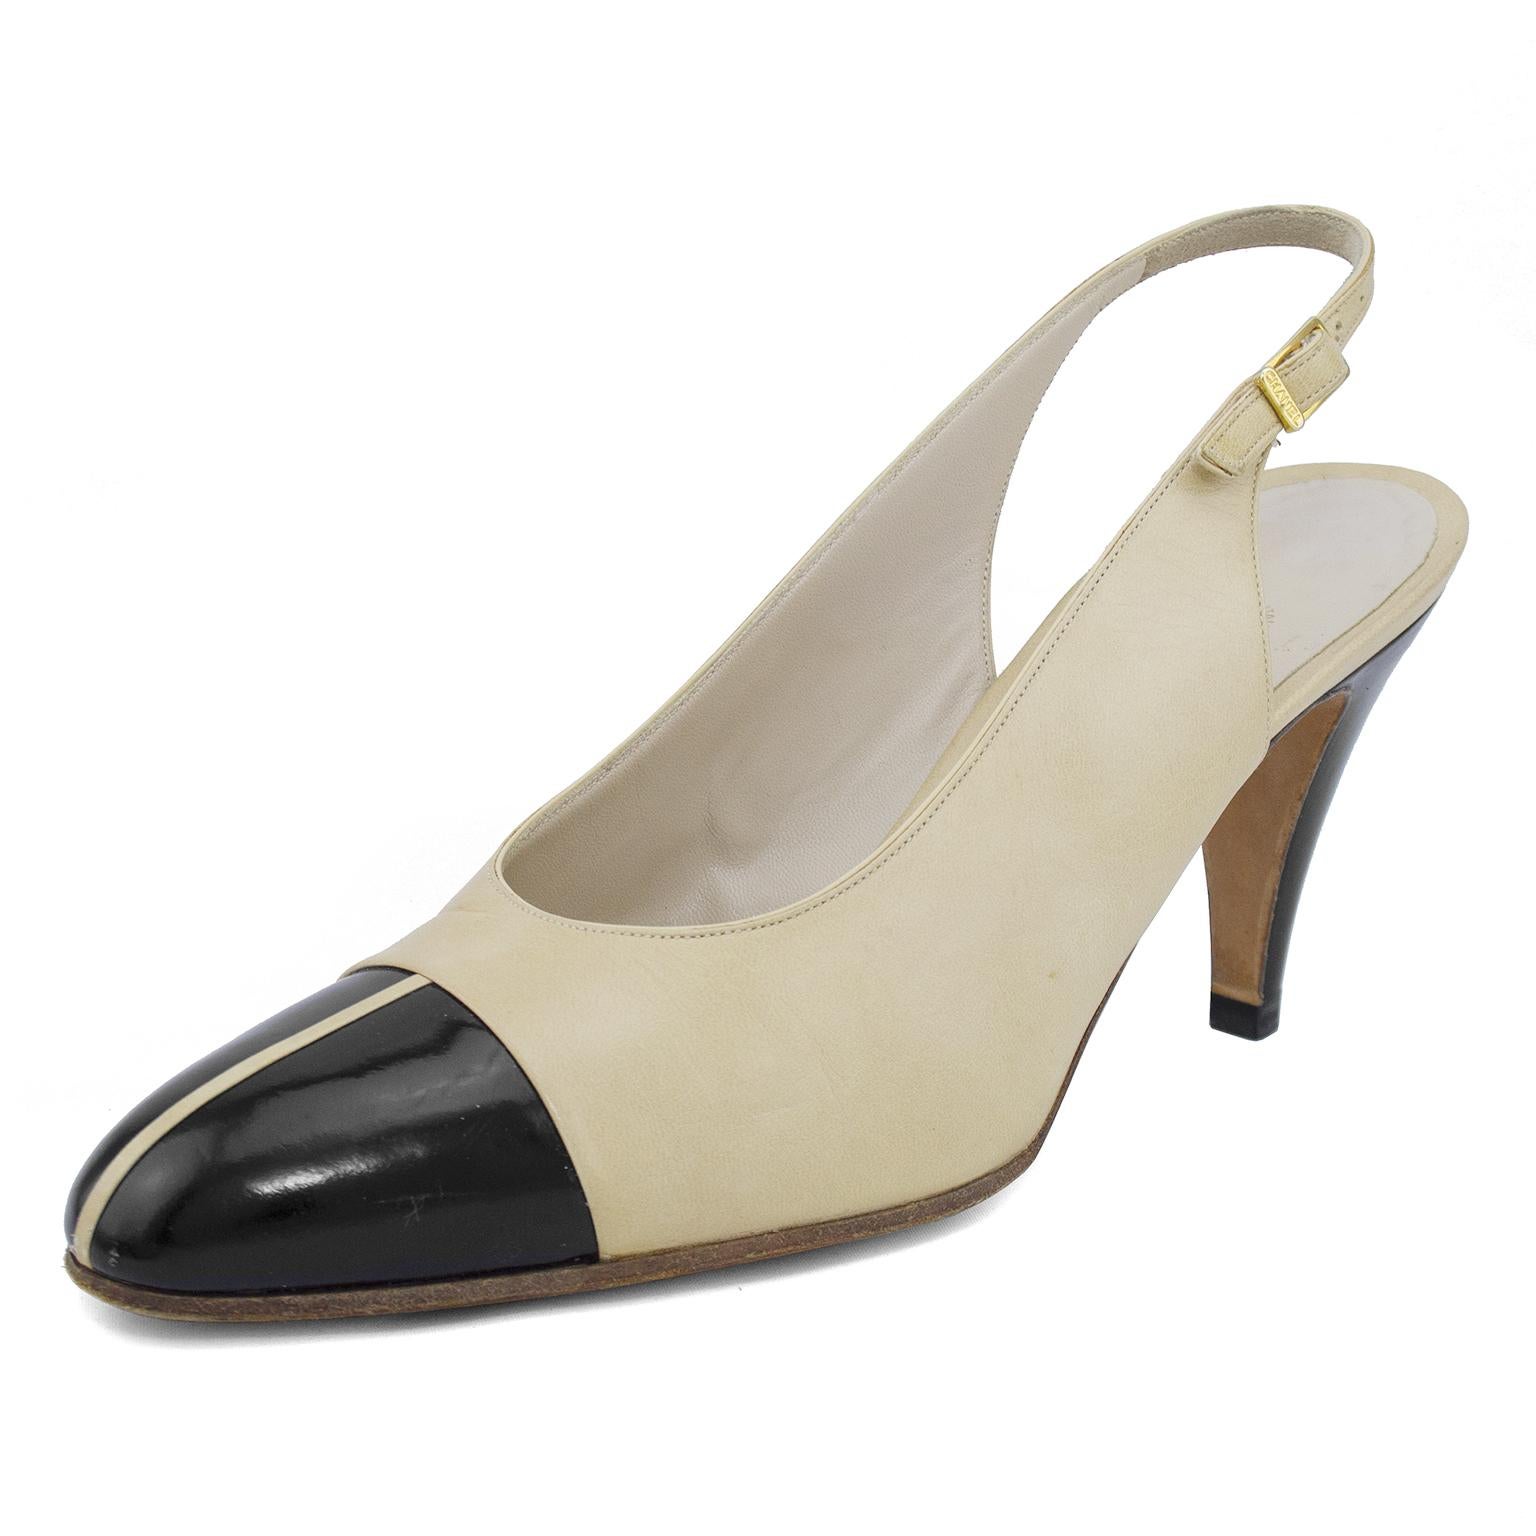 Early 1990s Chanel slingbacks. Beige leather with contrasting black leather cap toe. Slightly mod inspired with a vertical beige line down the centre of the black cap toe. Cream leather interior with metallic gold brand stamp. Gold-tone branded